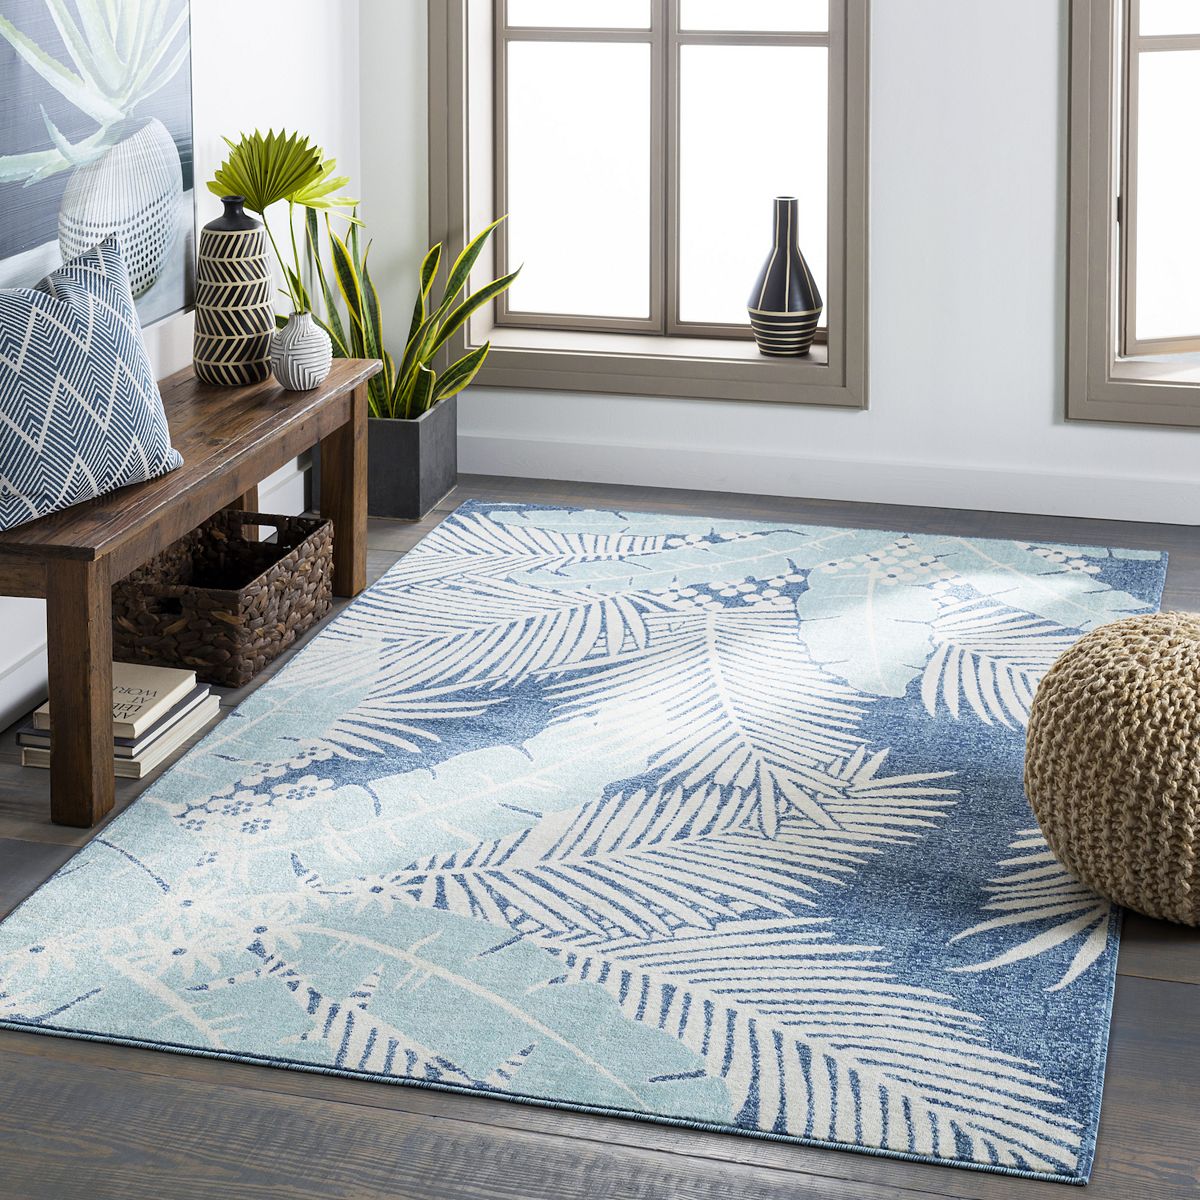 Coastal Rugs How To Pick The Best Area, Beach Style Throw Rugs